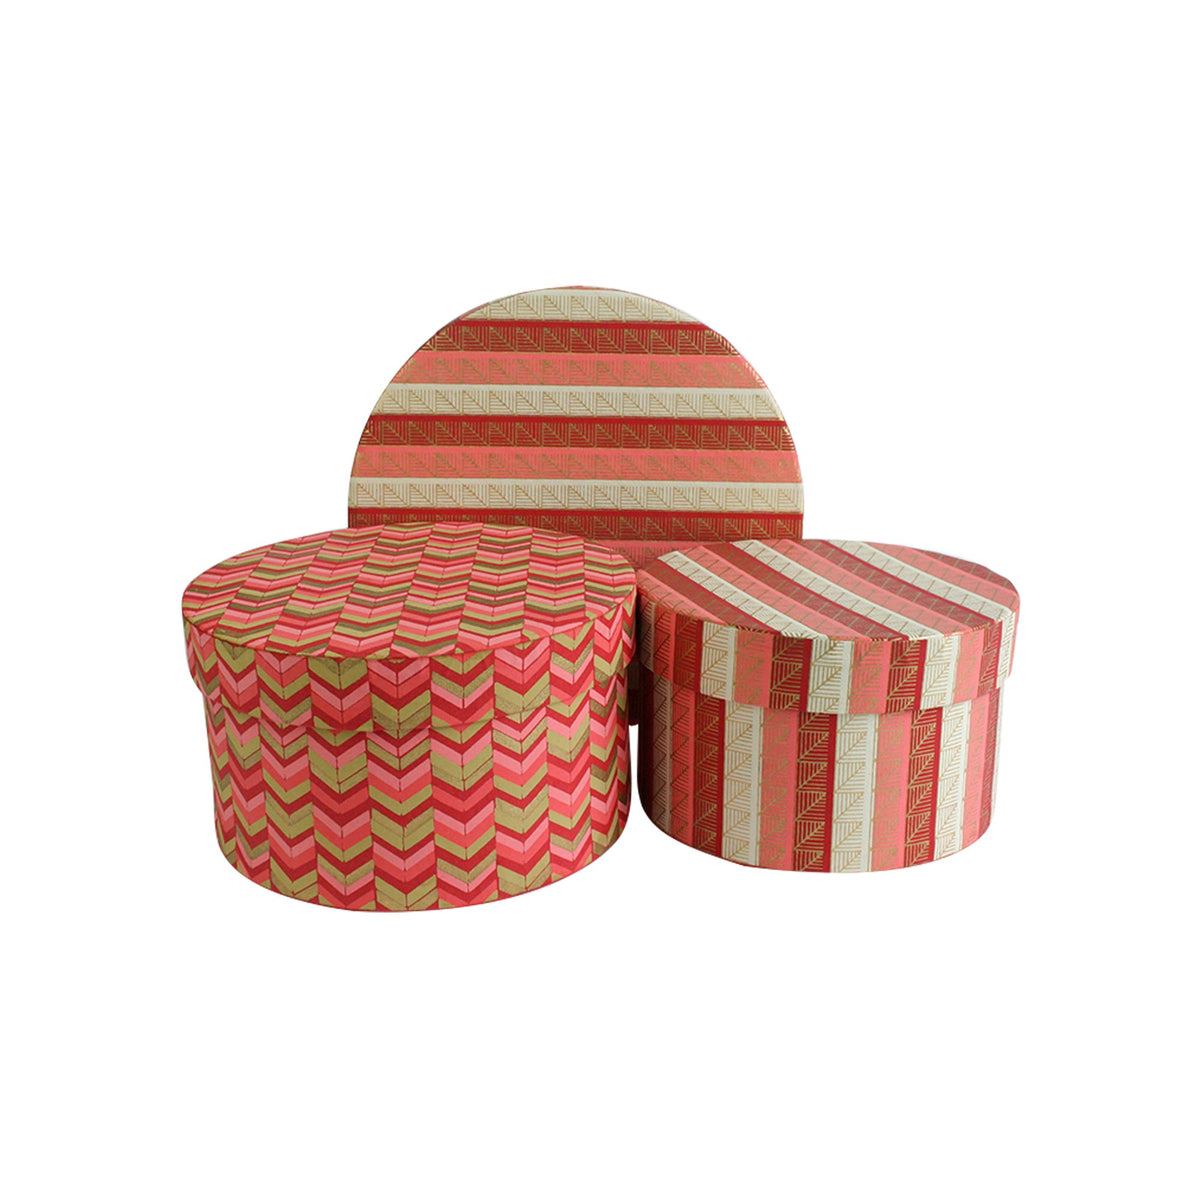 Handmade Chevron Patterned Red/Gold Gift Boxes - Set of 3